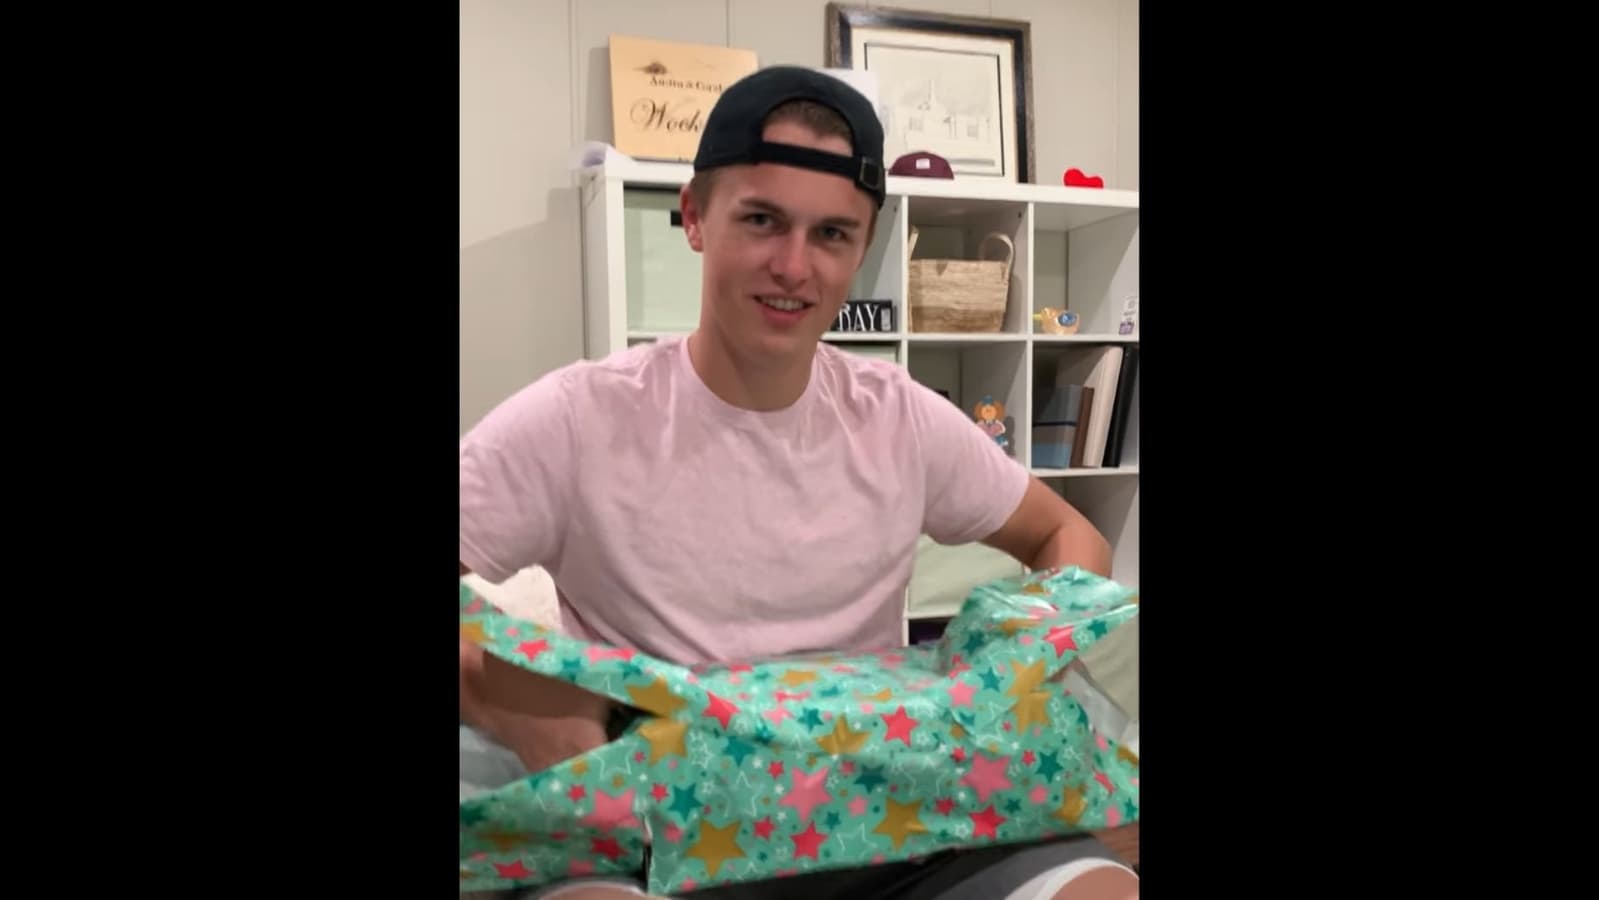 Woman surprises husband with Jordan shoes to announce pregnancy in viral video